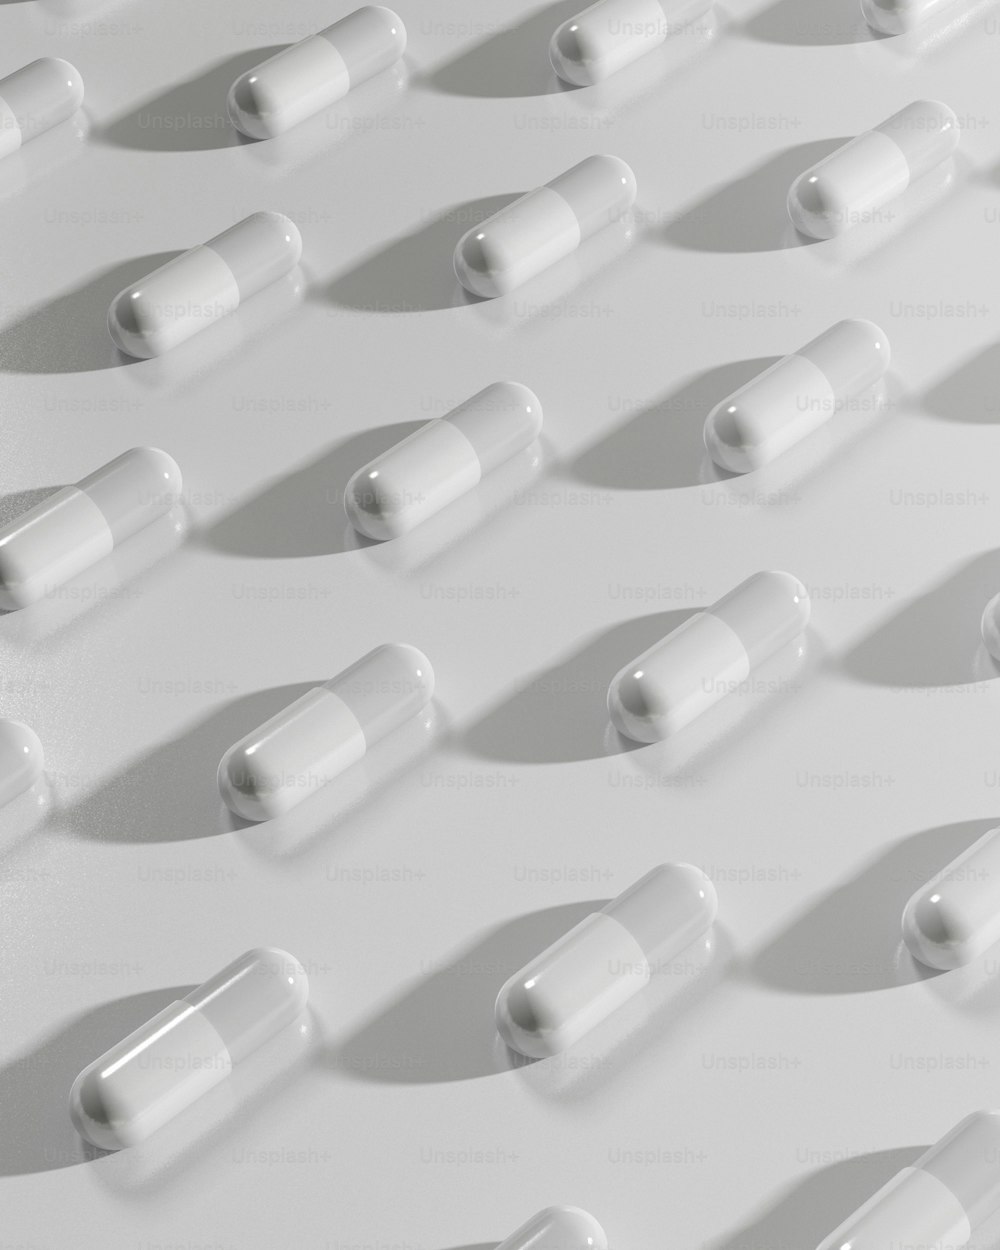 several pills lined up on a white surface